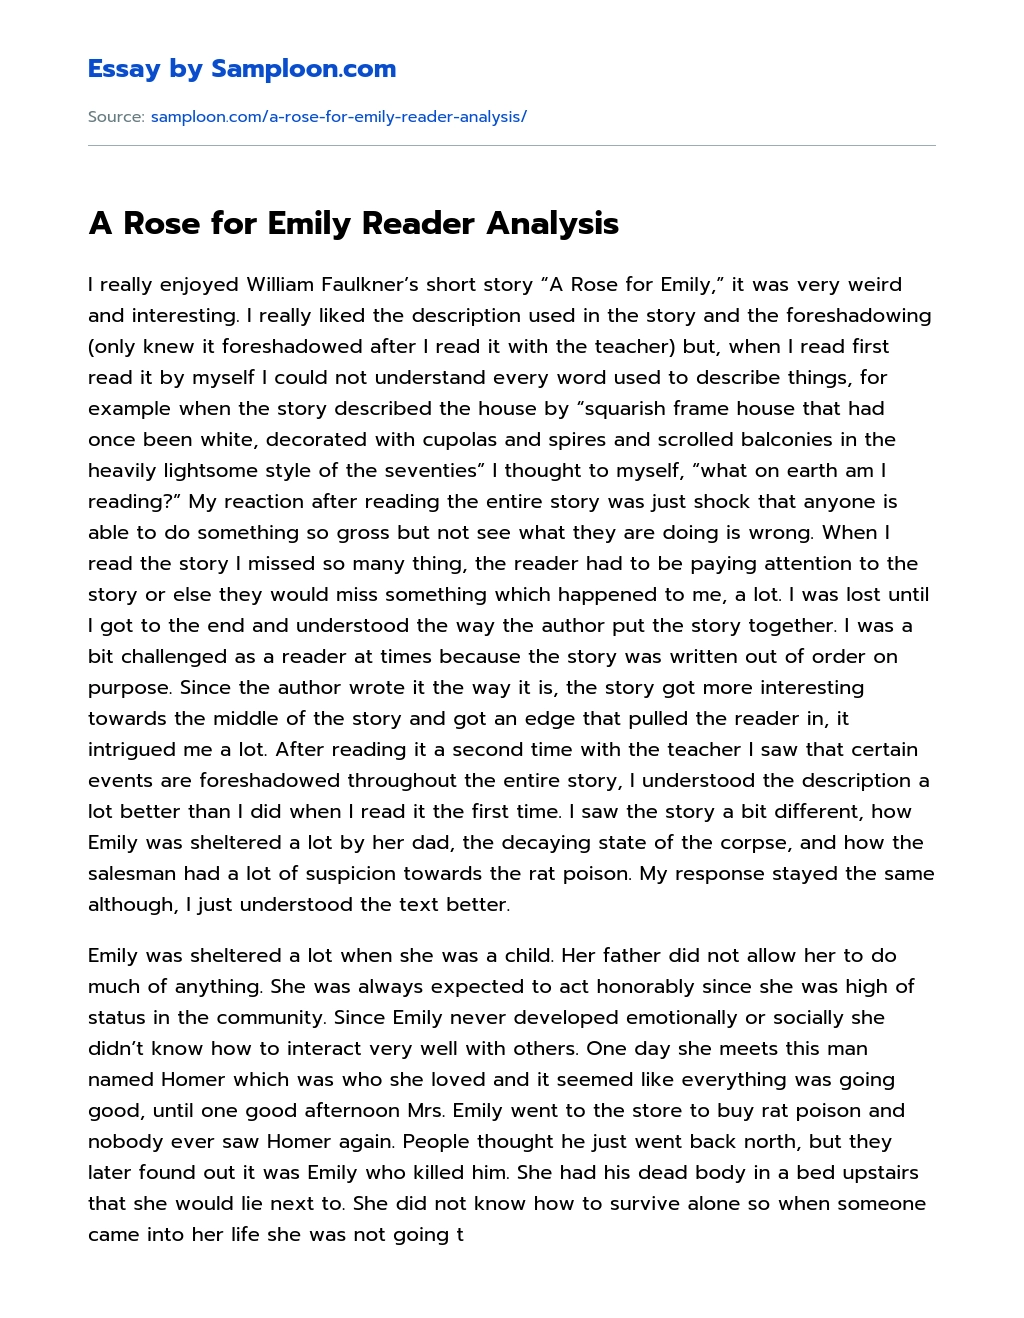 A Rose for Emily Reader Analysis essay